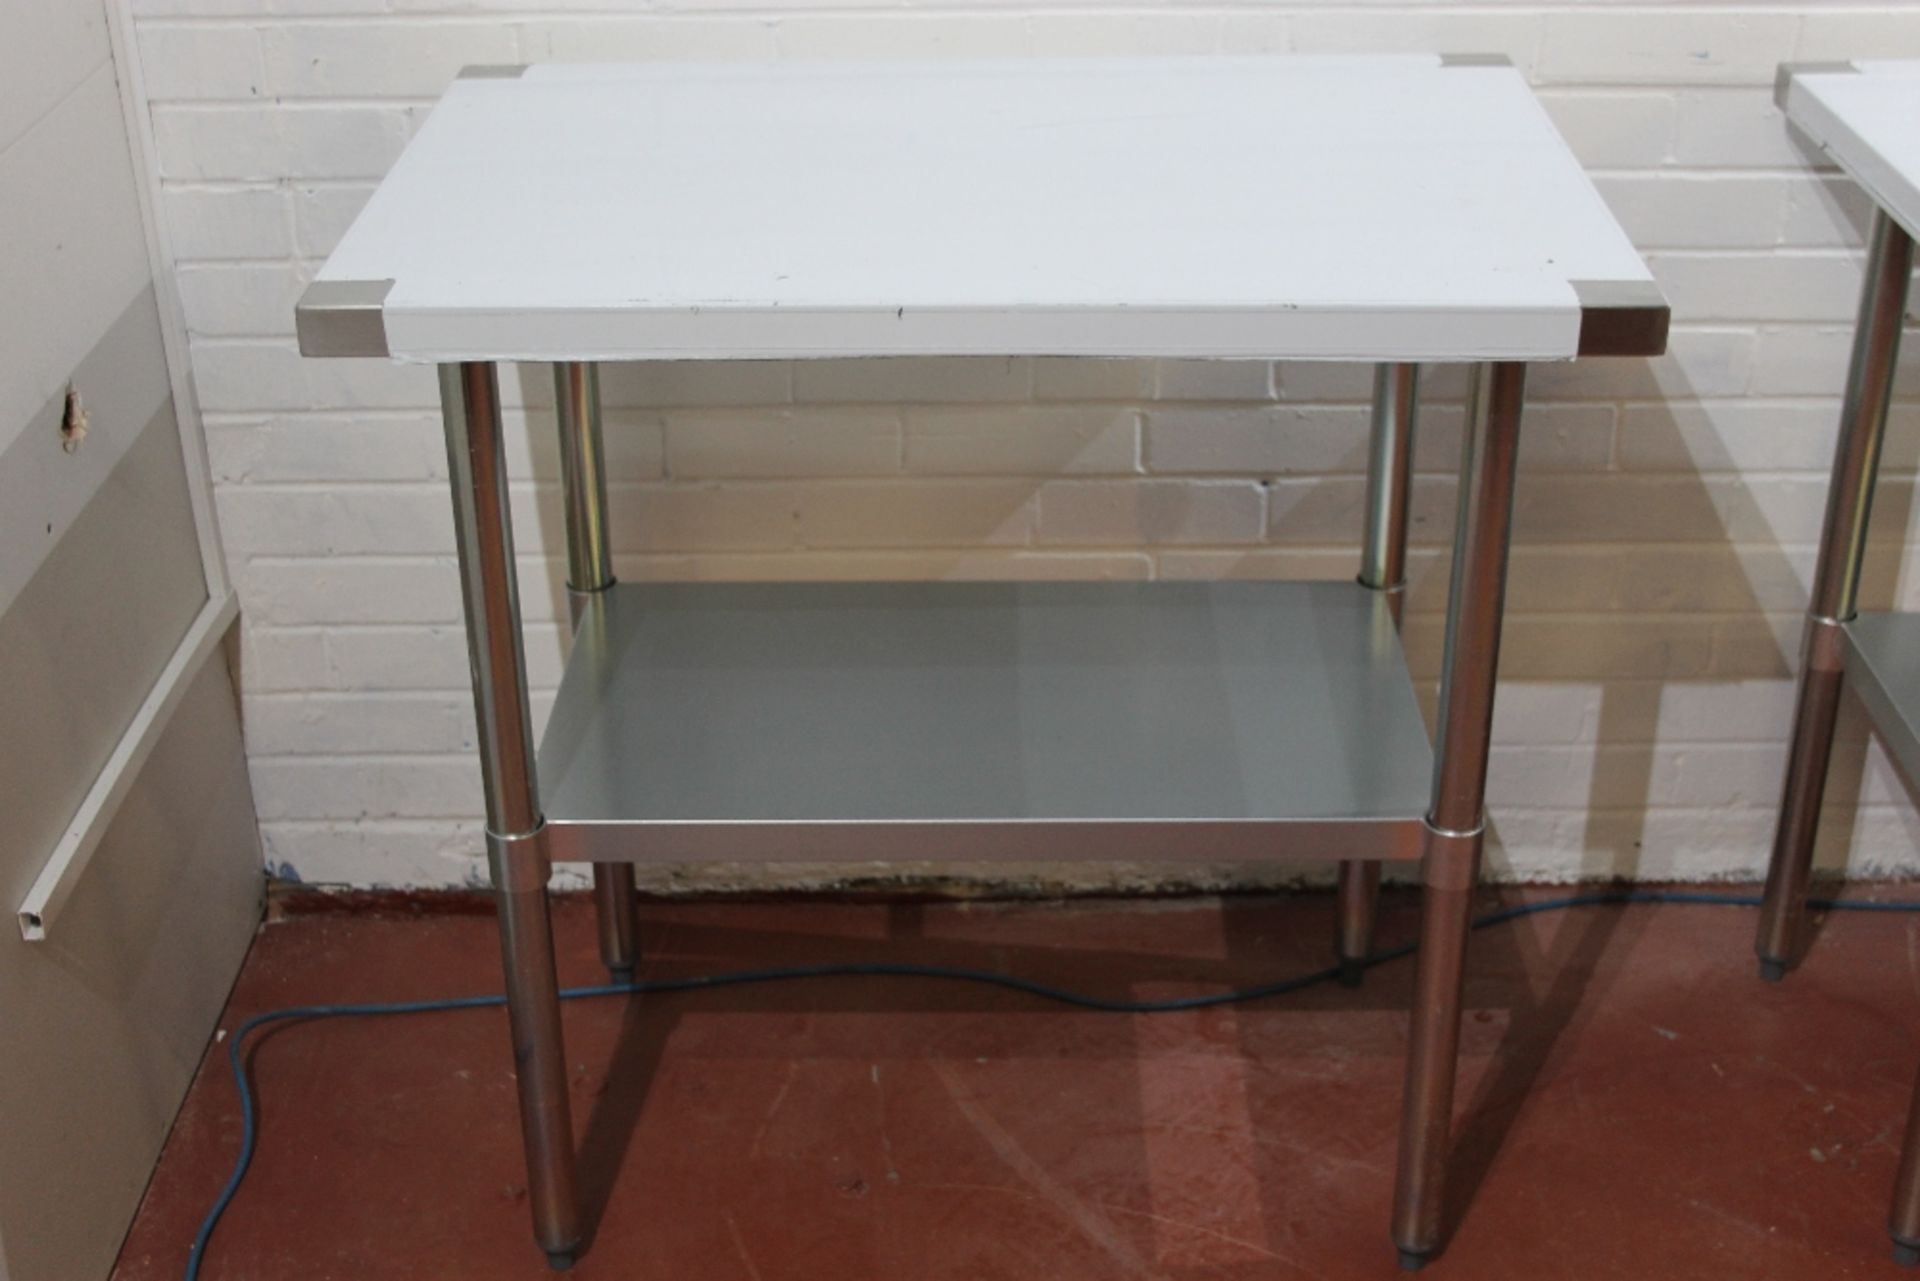 New Stainless Steel Table – Boxed – 900 x 600 mm